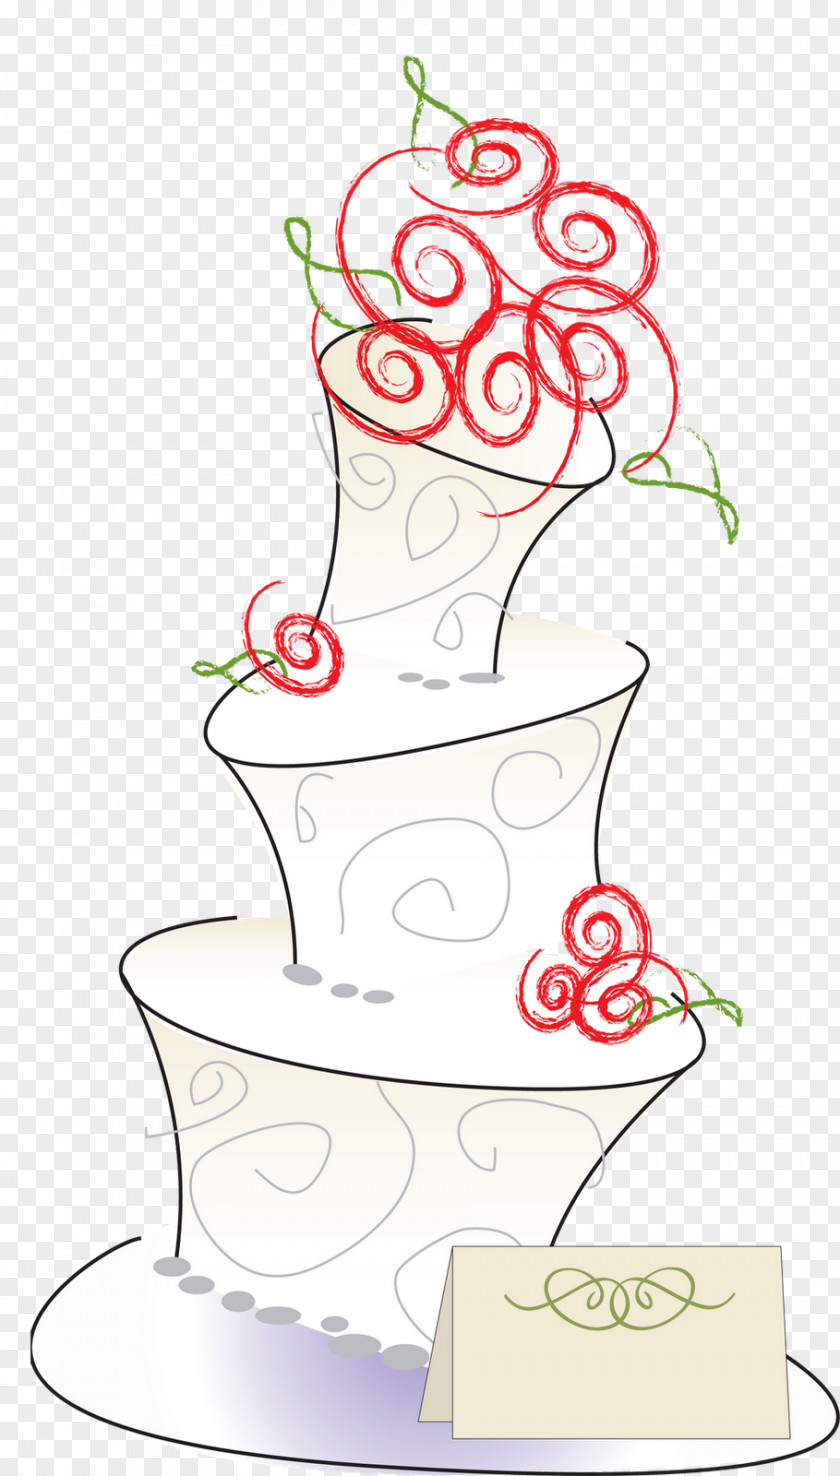 Whimsical Birthday Cliparts Wedding Cake Cupcake Clip Art PNG